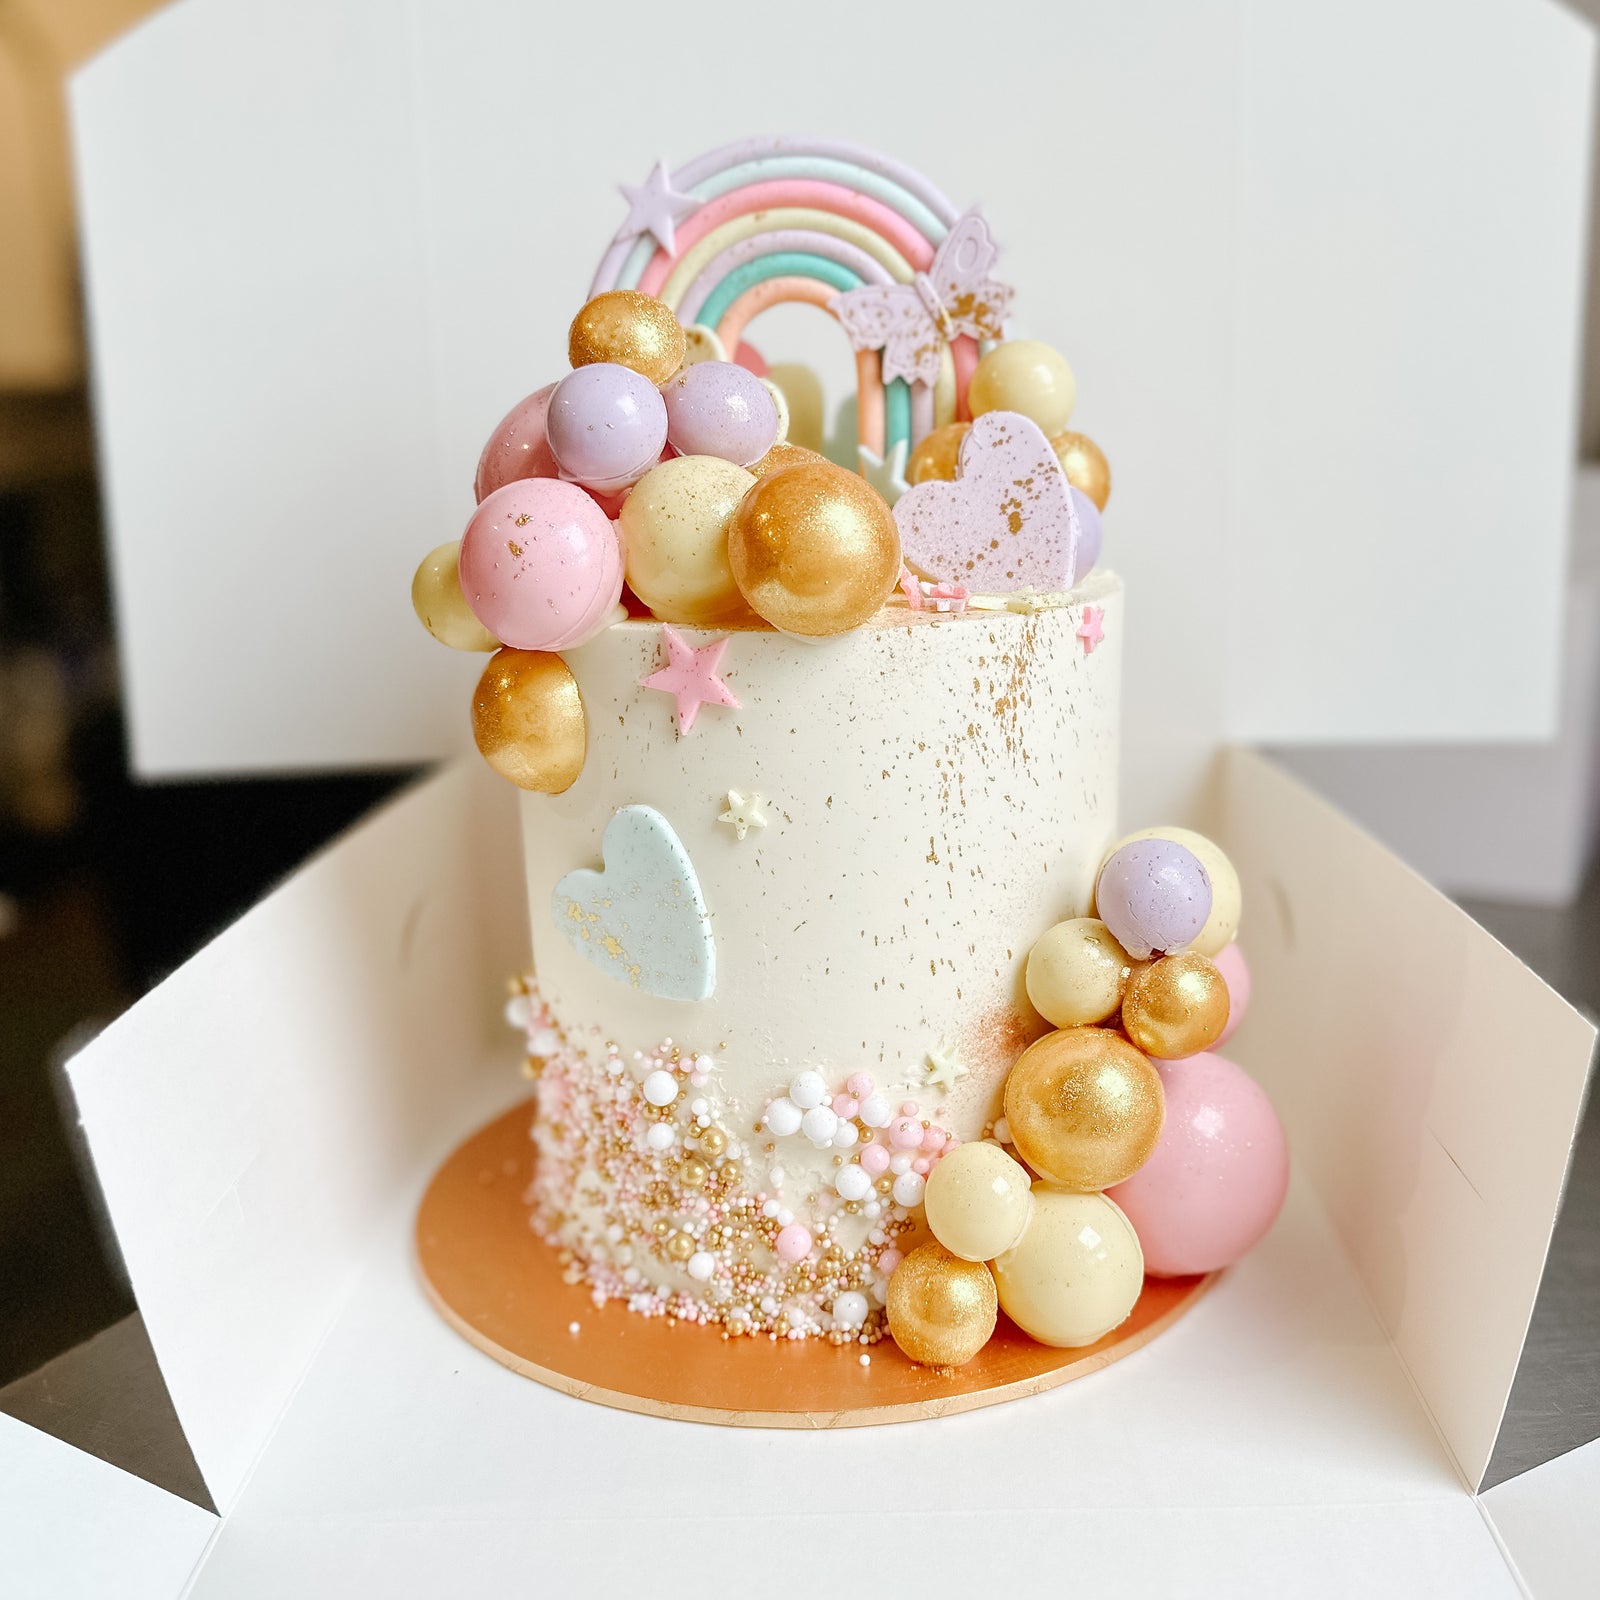 Personalised Cakes in Essex: Flavours List from Essex Cake Shop